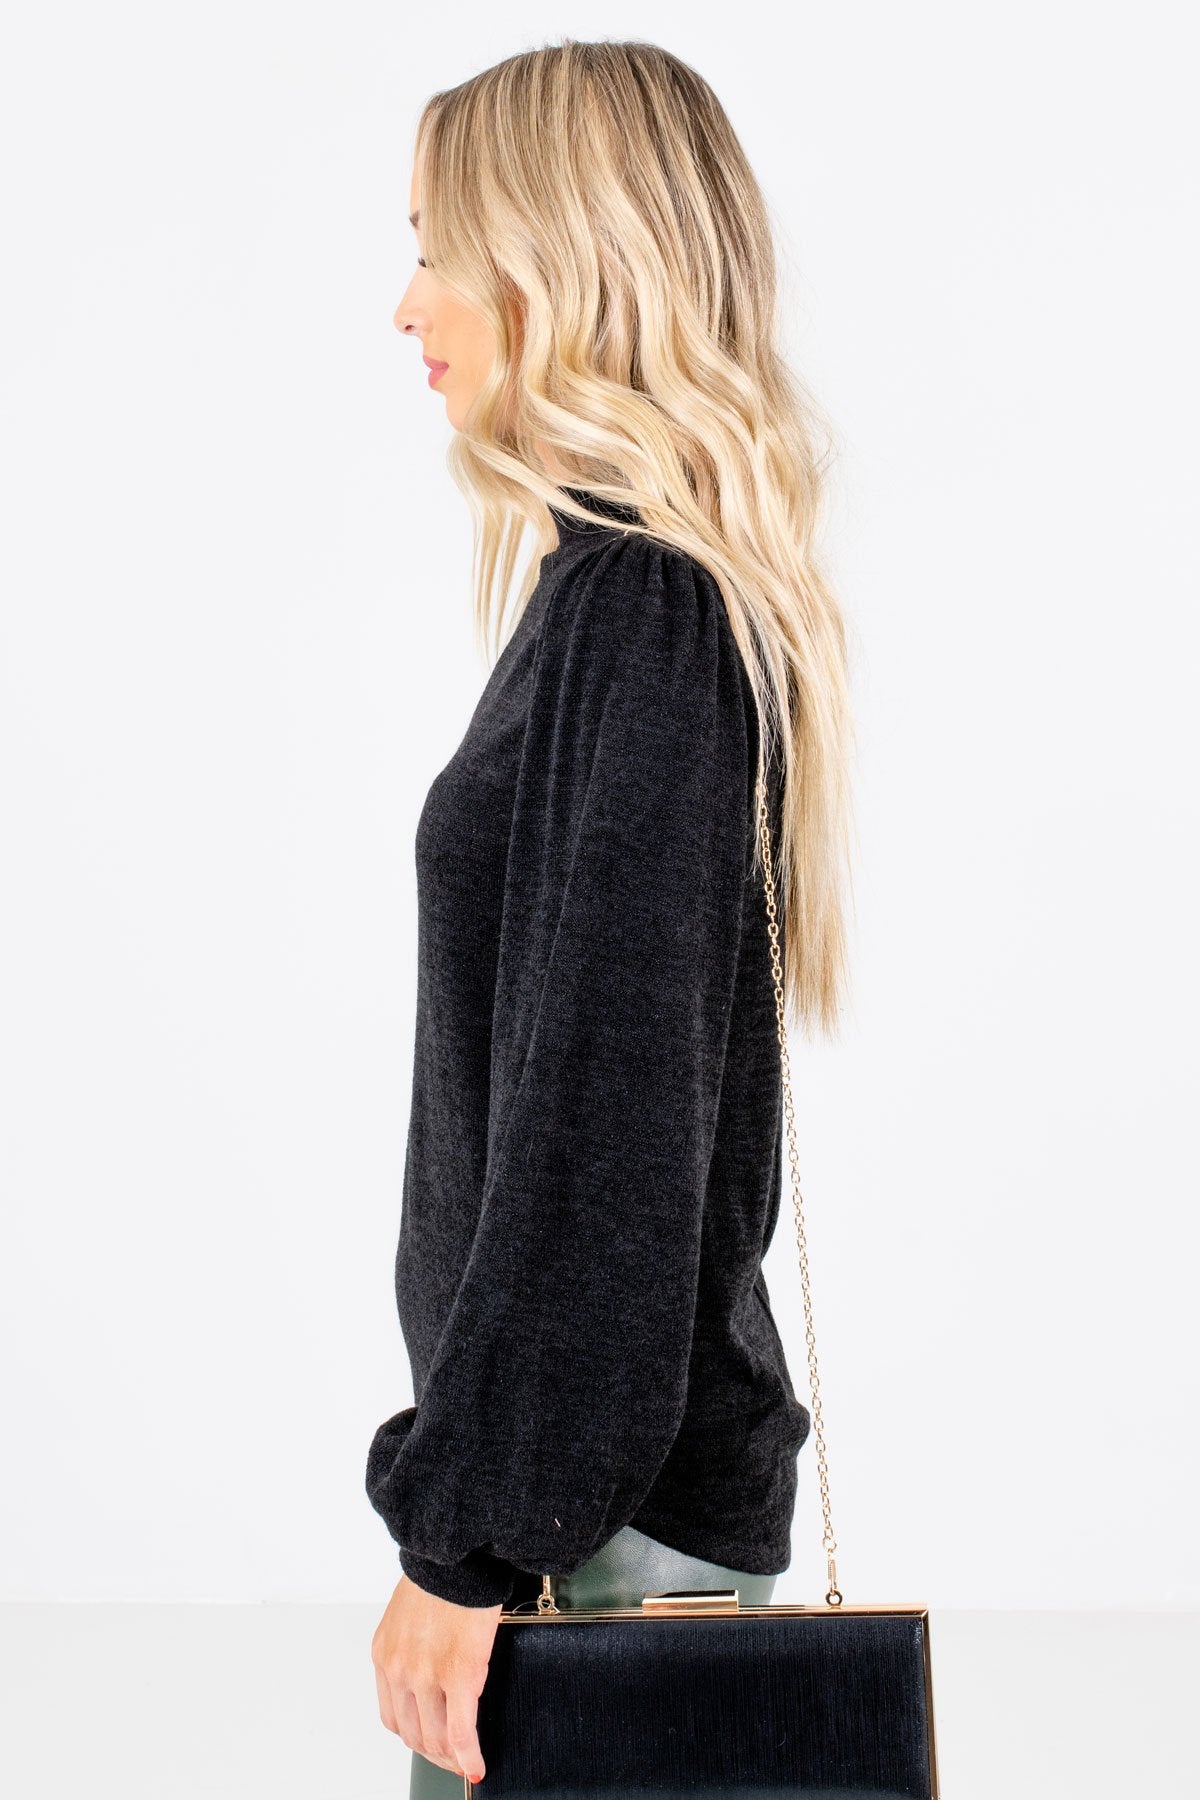 Women’s Black Cozy and Warm Boutique Clothing